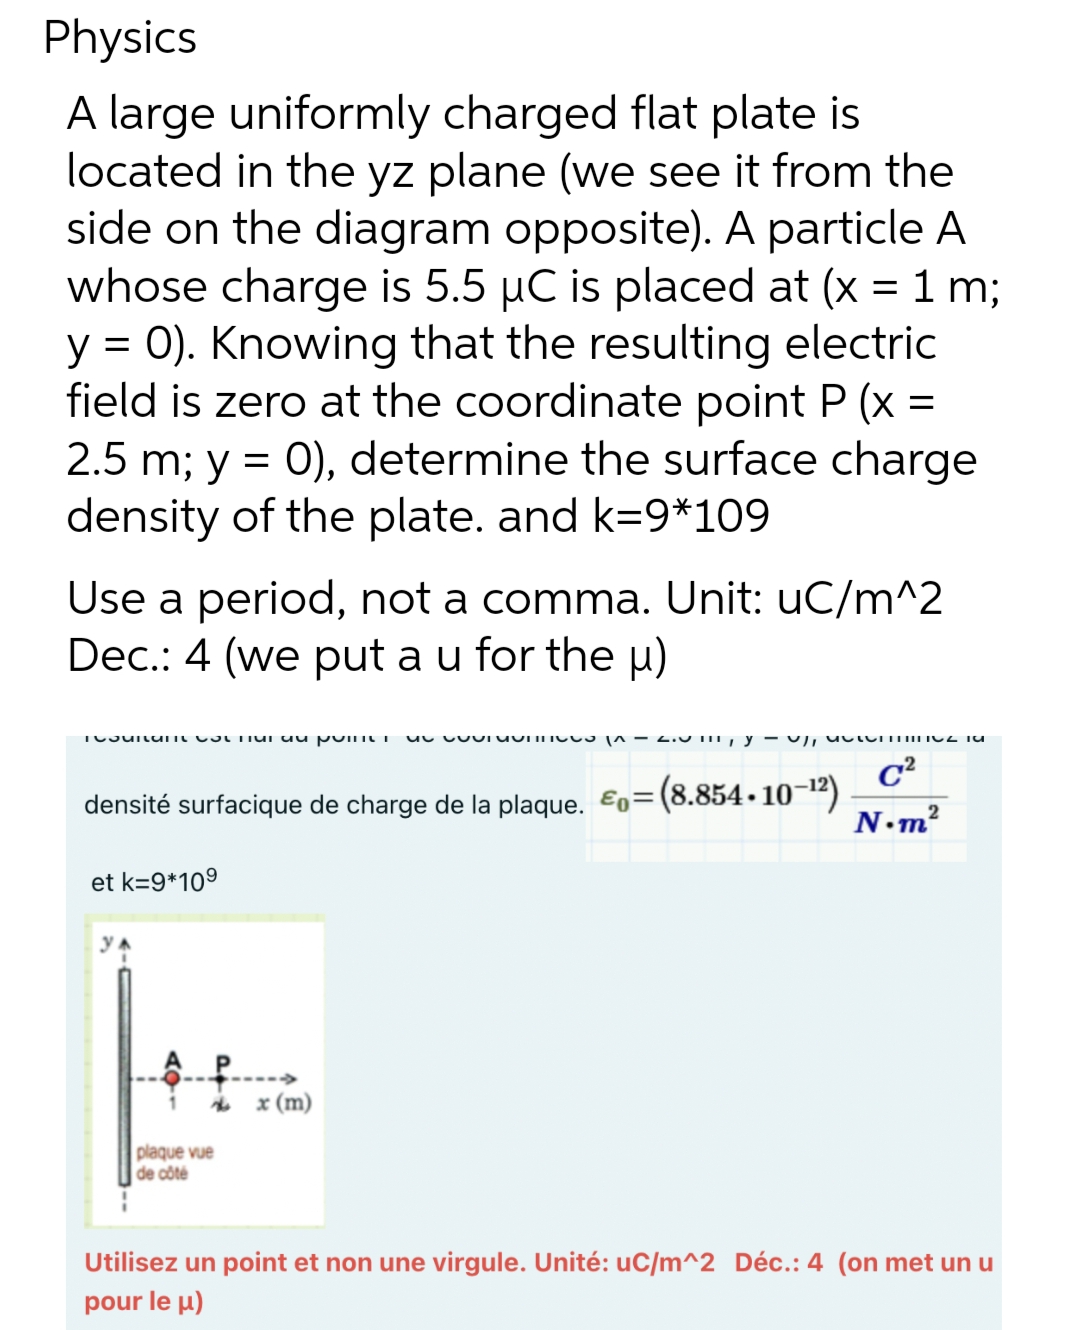 Physics
A large uniformly charged flat plate is
located in the yz plane (we see it from the
side on the diagram opposite). A particle A
whose charge is 5.5 µC is placed at (x = 1 m;
y = 0). Knowing that the resulting electric
field is zero at the coordinate point P (x =
2.5 m; y = 0), determine the surface charge
density of the plate. and k=9*109
Use a period, not a comma. Unit: uC/m^2
Dec.: 4 (we put a u for the µ)
Tosunun Tu au poinUI
densité surfacique de charge de la plaque. E=(8.854.10-¹²)
et k=9*109
plaque vue
de côté
unnus |^ — 2.0 1, y , atormINIO TU
C²
x (m)
2
N.m²
Utilisez un point et non une virgule. Unité: uC/m^2 Déc.: 4 (on met un u
pour le μ)